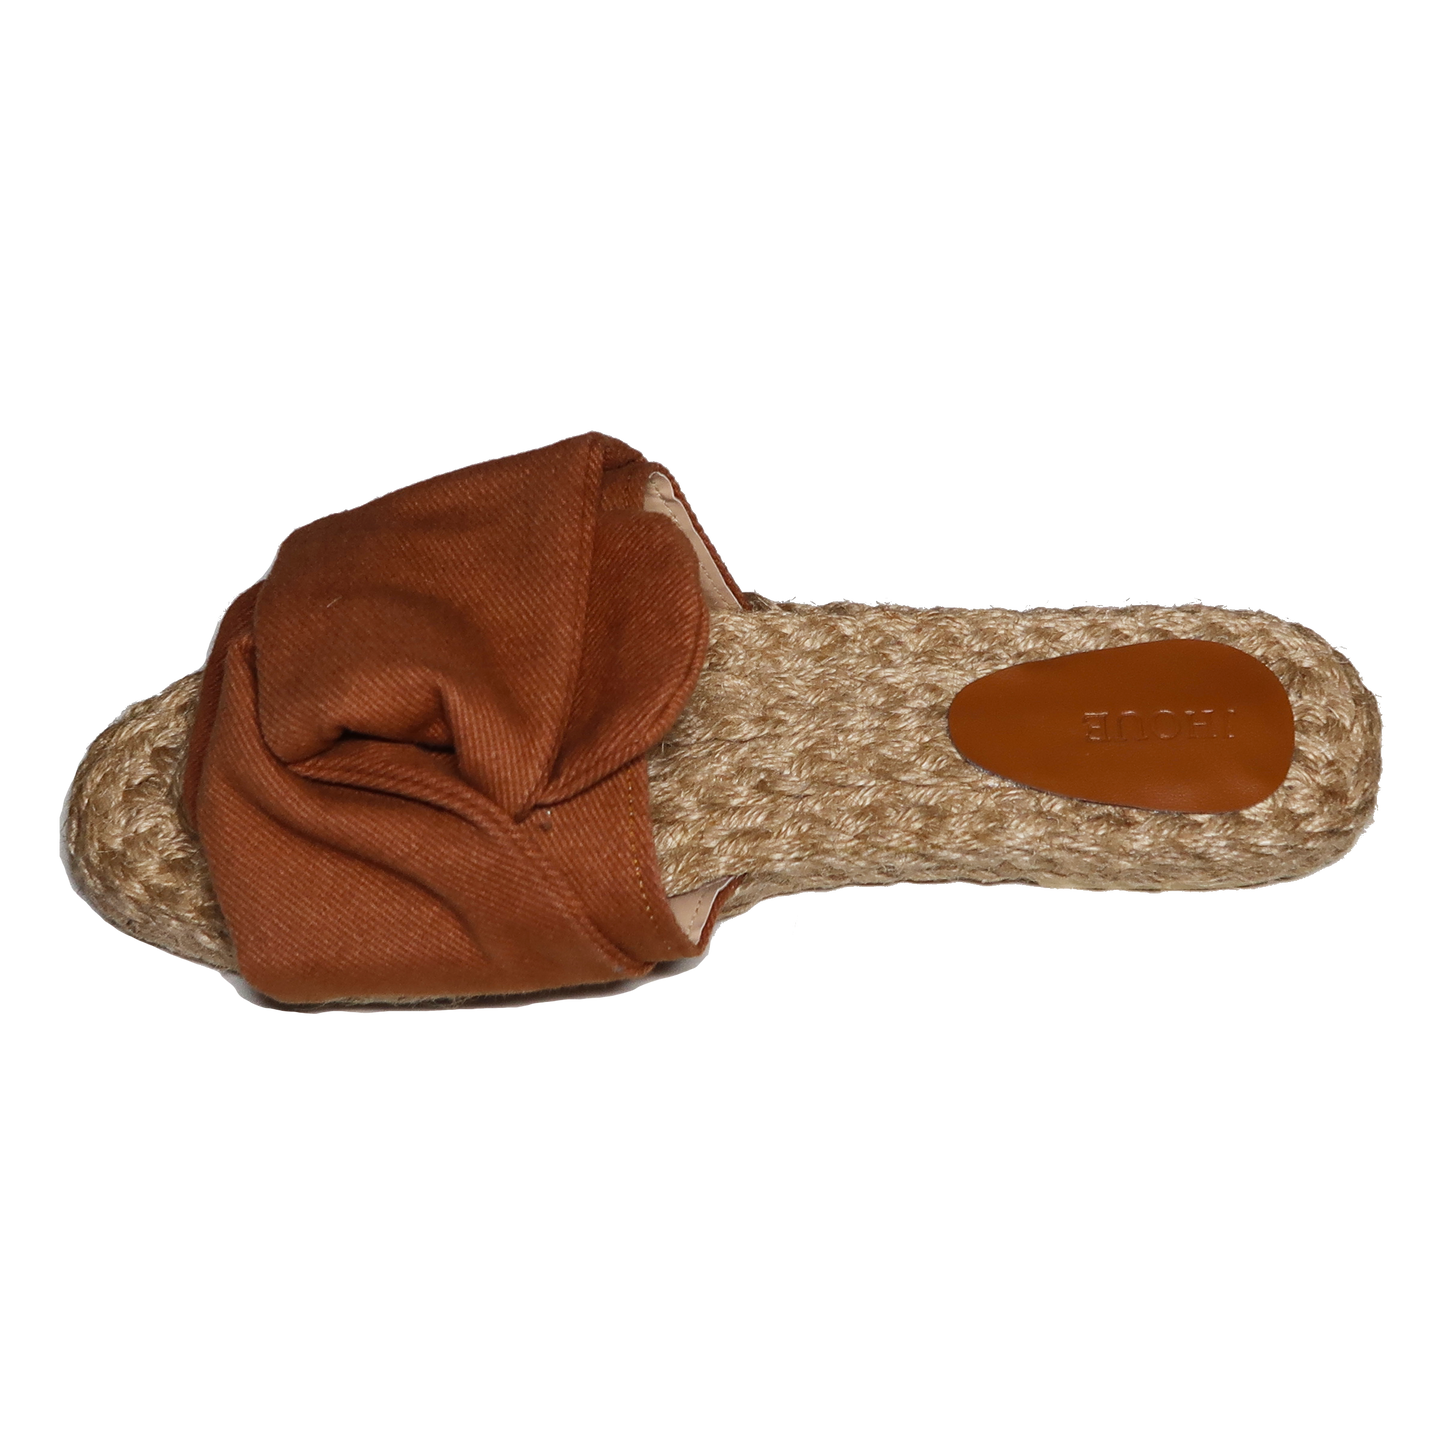 Handmade Abaca Footbed Tan Canvas Tie Knot Strap Slides Sandals Slippers Flats Semi Pointed Toe